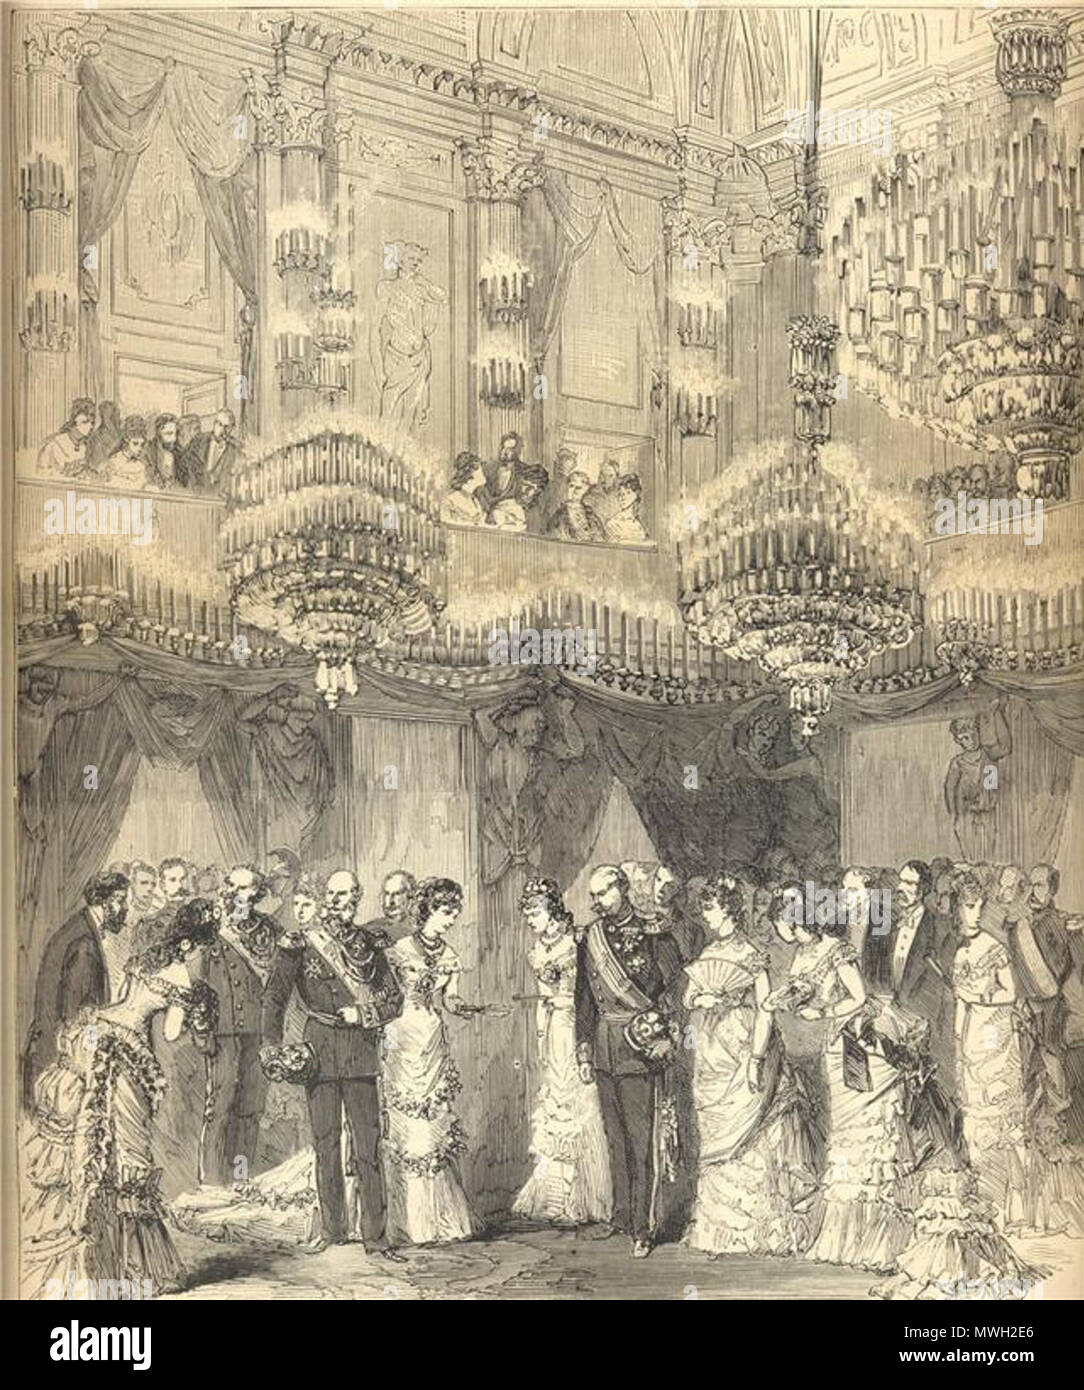 .  English: 'The Official Reception in the Royal Palace in Milan, Italy, of Wilhelm I of Germany, in 1875' (notably, in the 'Sala delle Cariatidi', later demolished by a bombing during World War 2). From 'L'Illustration' ( http://www.lillustration.com ), 1875. Drawing by Charles Fichot (1817-1903) & Paul-Adolphe Kauffmann (1849-1935?), engraving by Joseph Burn-Smeeton (floruit 1840-1880) and his pupil and later partner Auguste Tilly (18..-1898).  . 1875. Charles Fichot; Paul-Adolphe Kauffmann; Joseph Burn-Smeeton; Auguste Tilly. 414 MI - 1875 - Da L'illustration, 1875 - Visita Guglielmo II a M Stock Photo